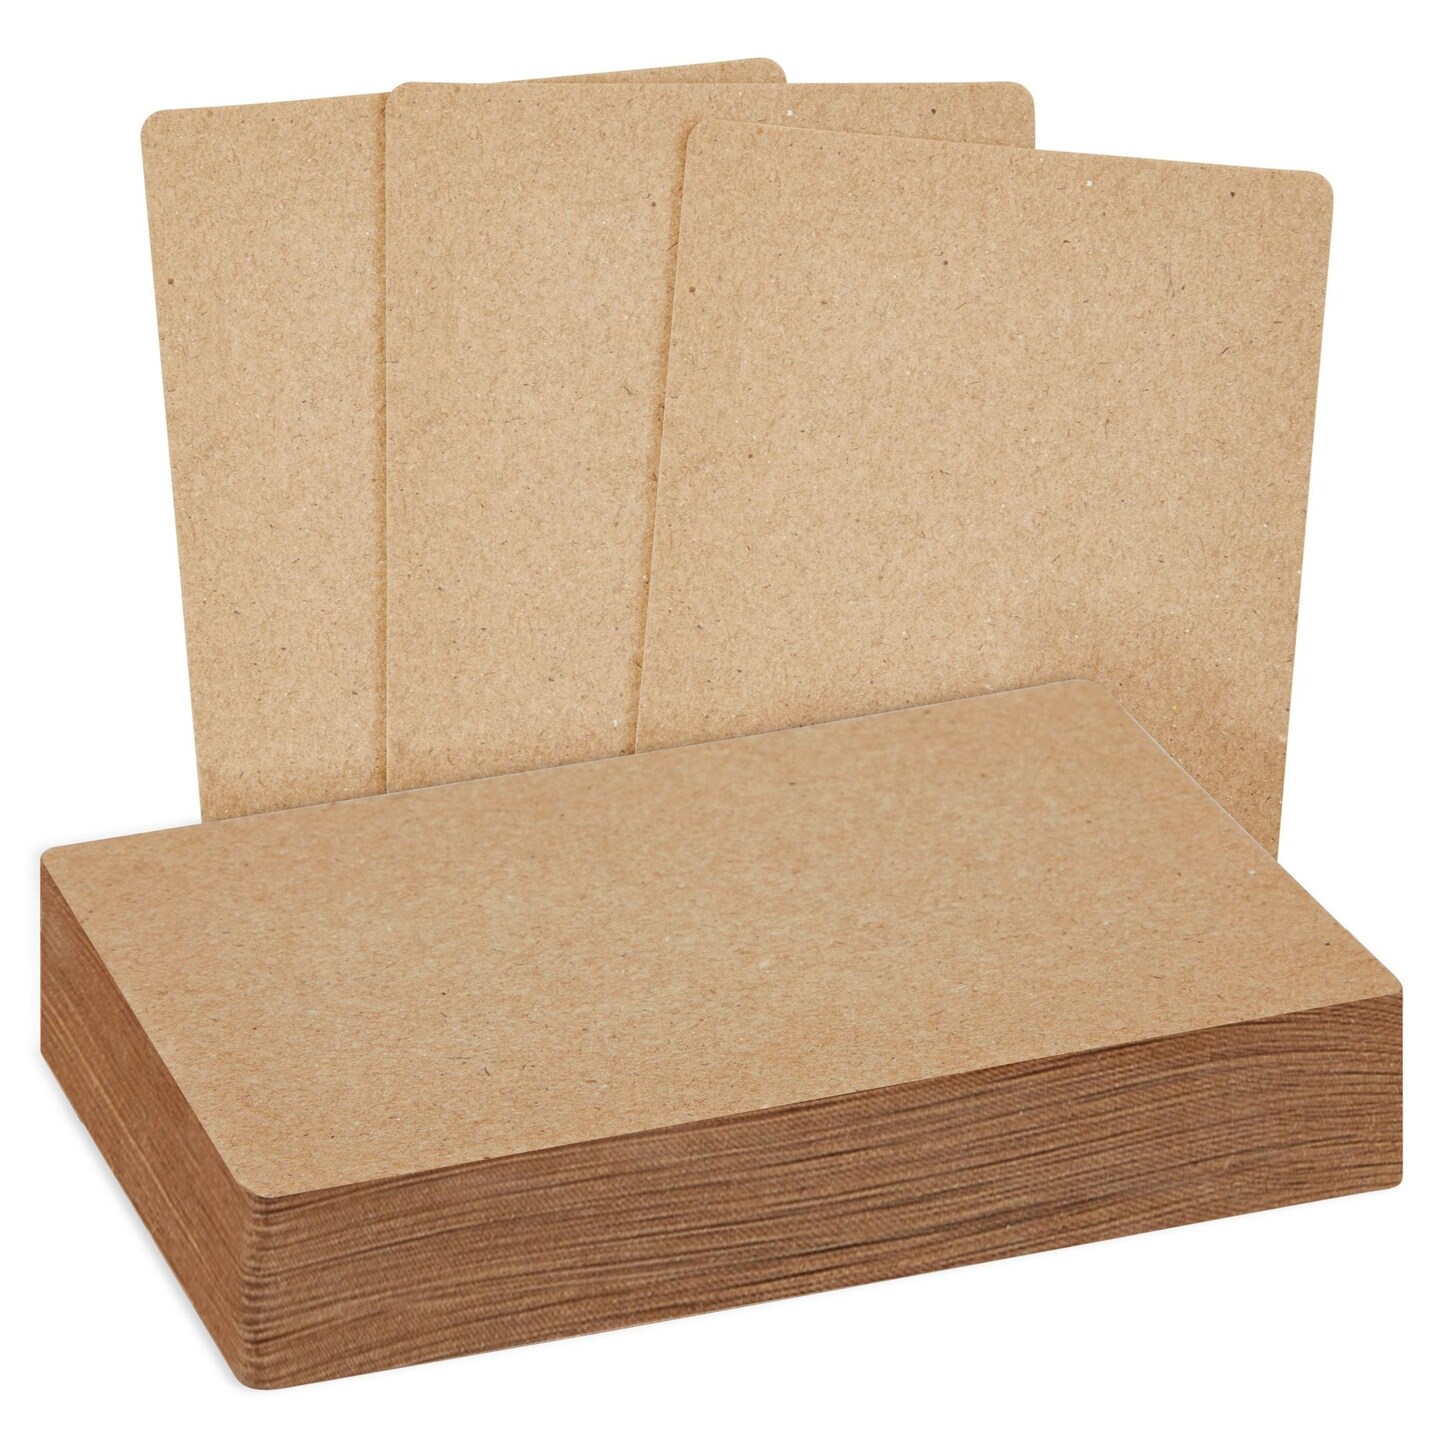 School & Office supplies - Notebook & Paper - Index Cards - The